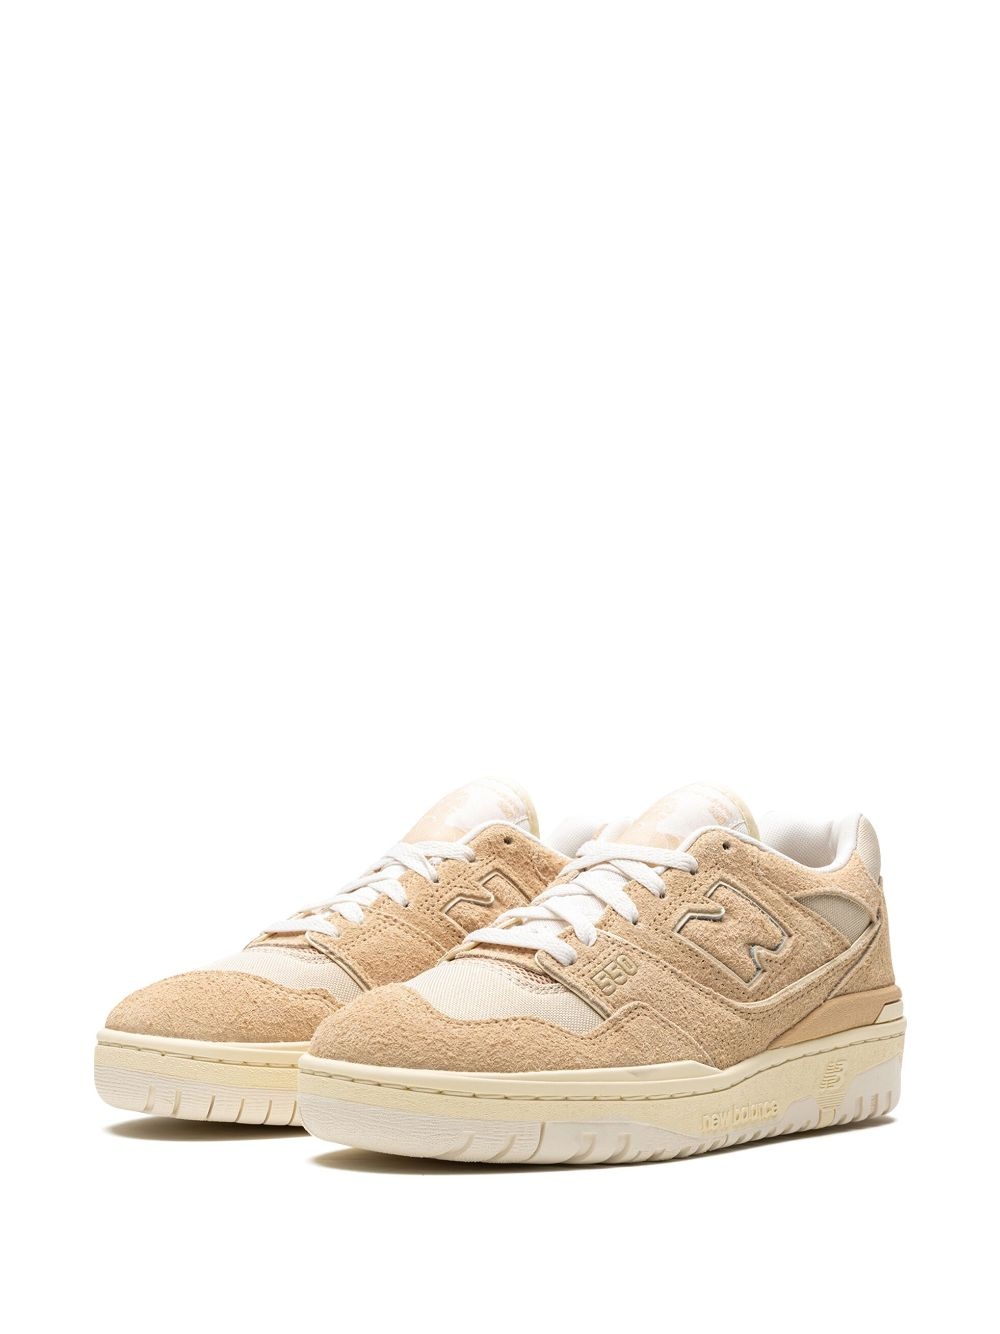 550 "Aime Leon Dore Taupe Suede" sneakers - 5